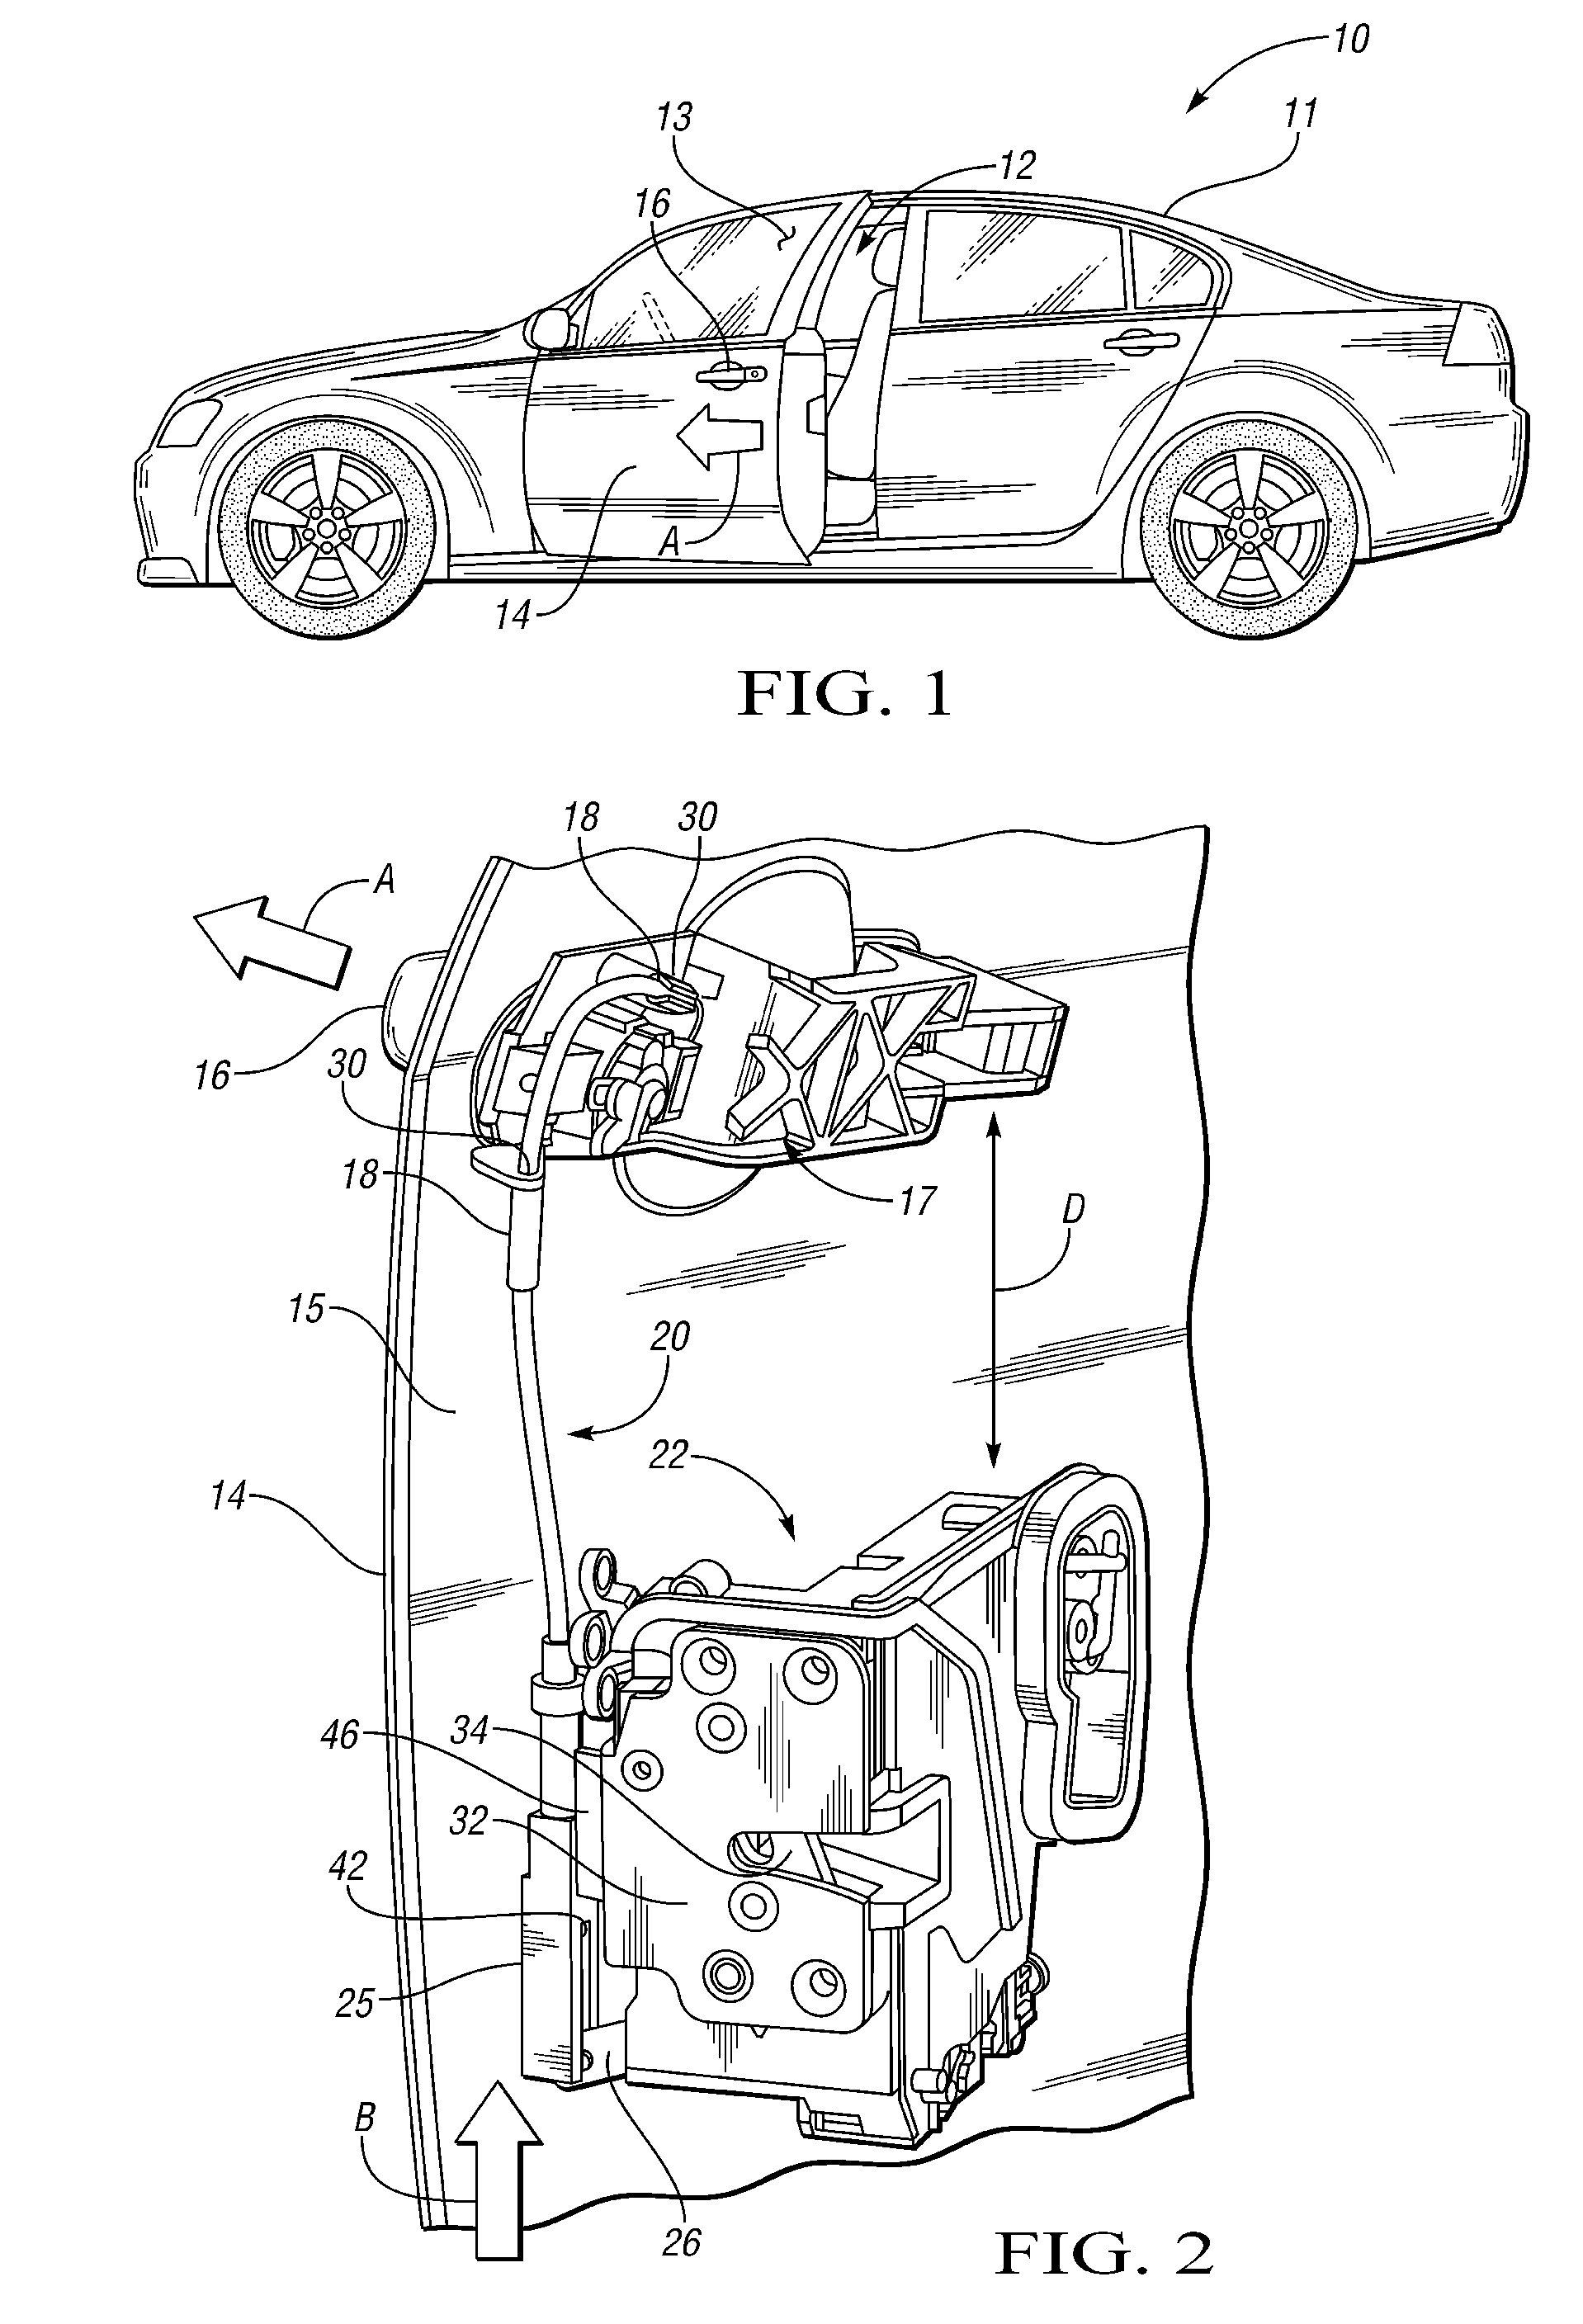 Cable-actuated inertial lock for a vehicle door